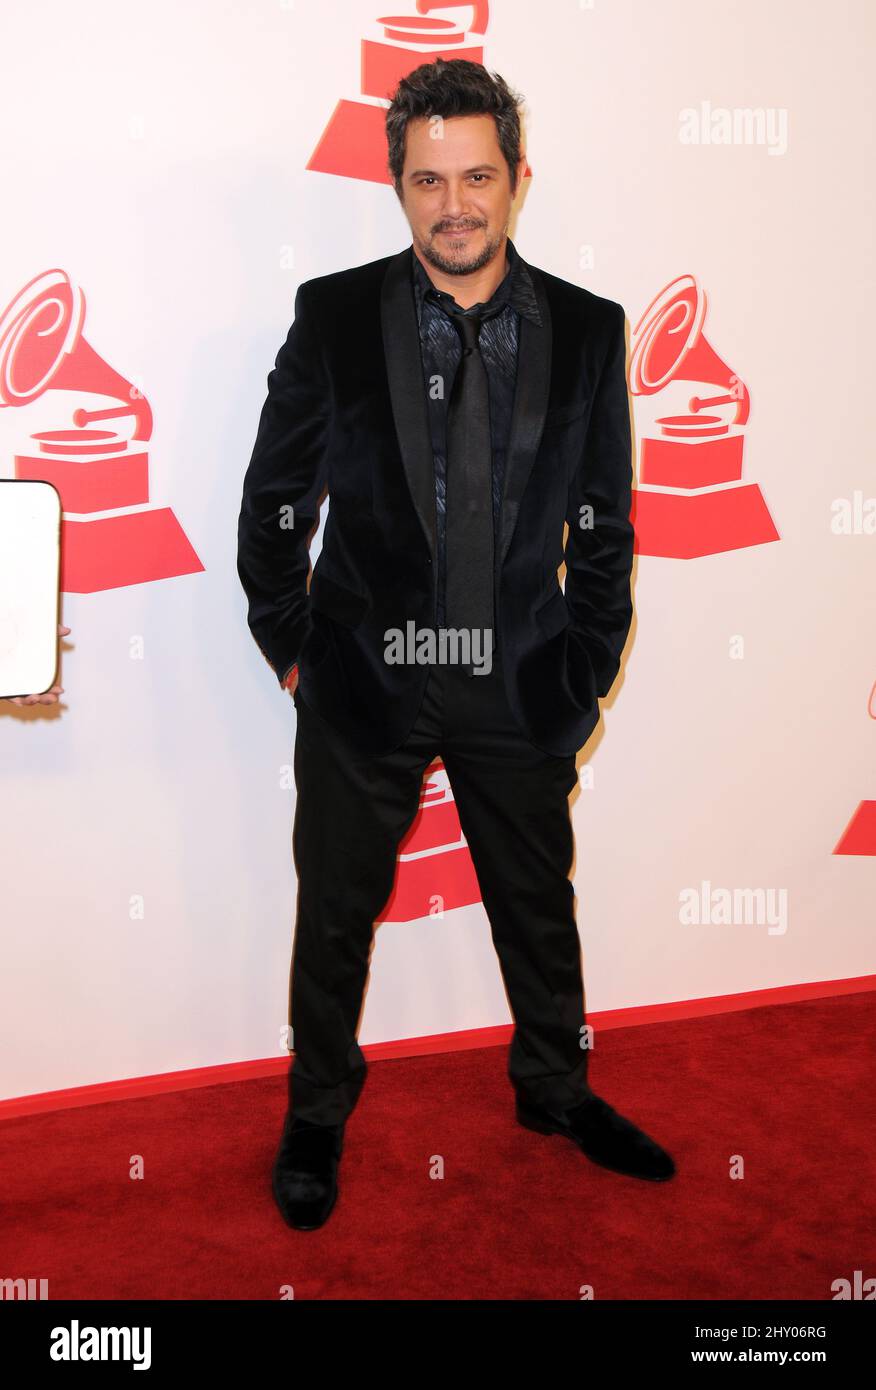 Alejandro Sanz nimmt an der Latin Recording Academy Person of the Year Tribute to Caetano Veloso 2012 in der MGM Grand Garden Arena in Las Vegas, USA, Teil. Stockfoto